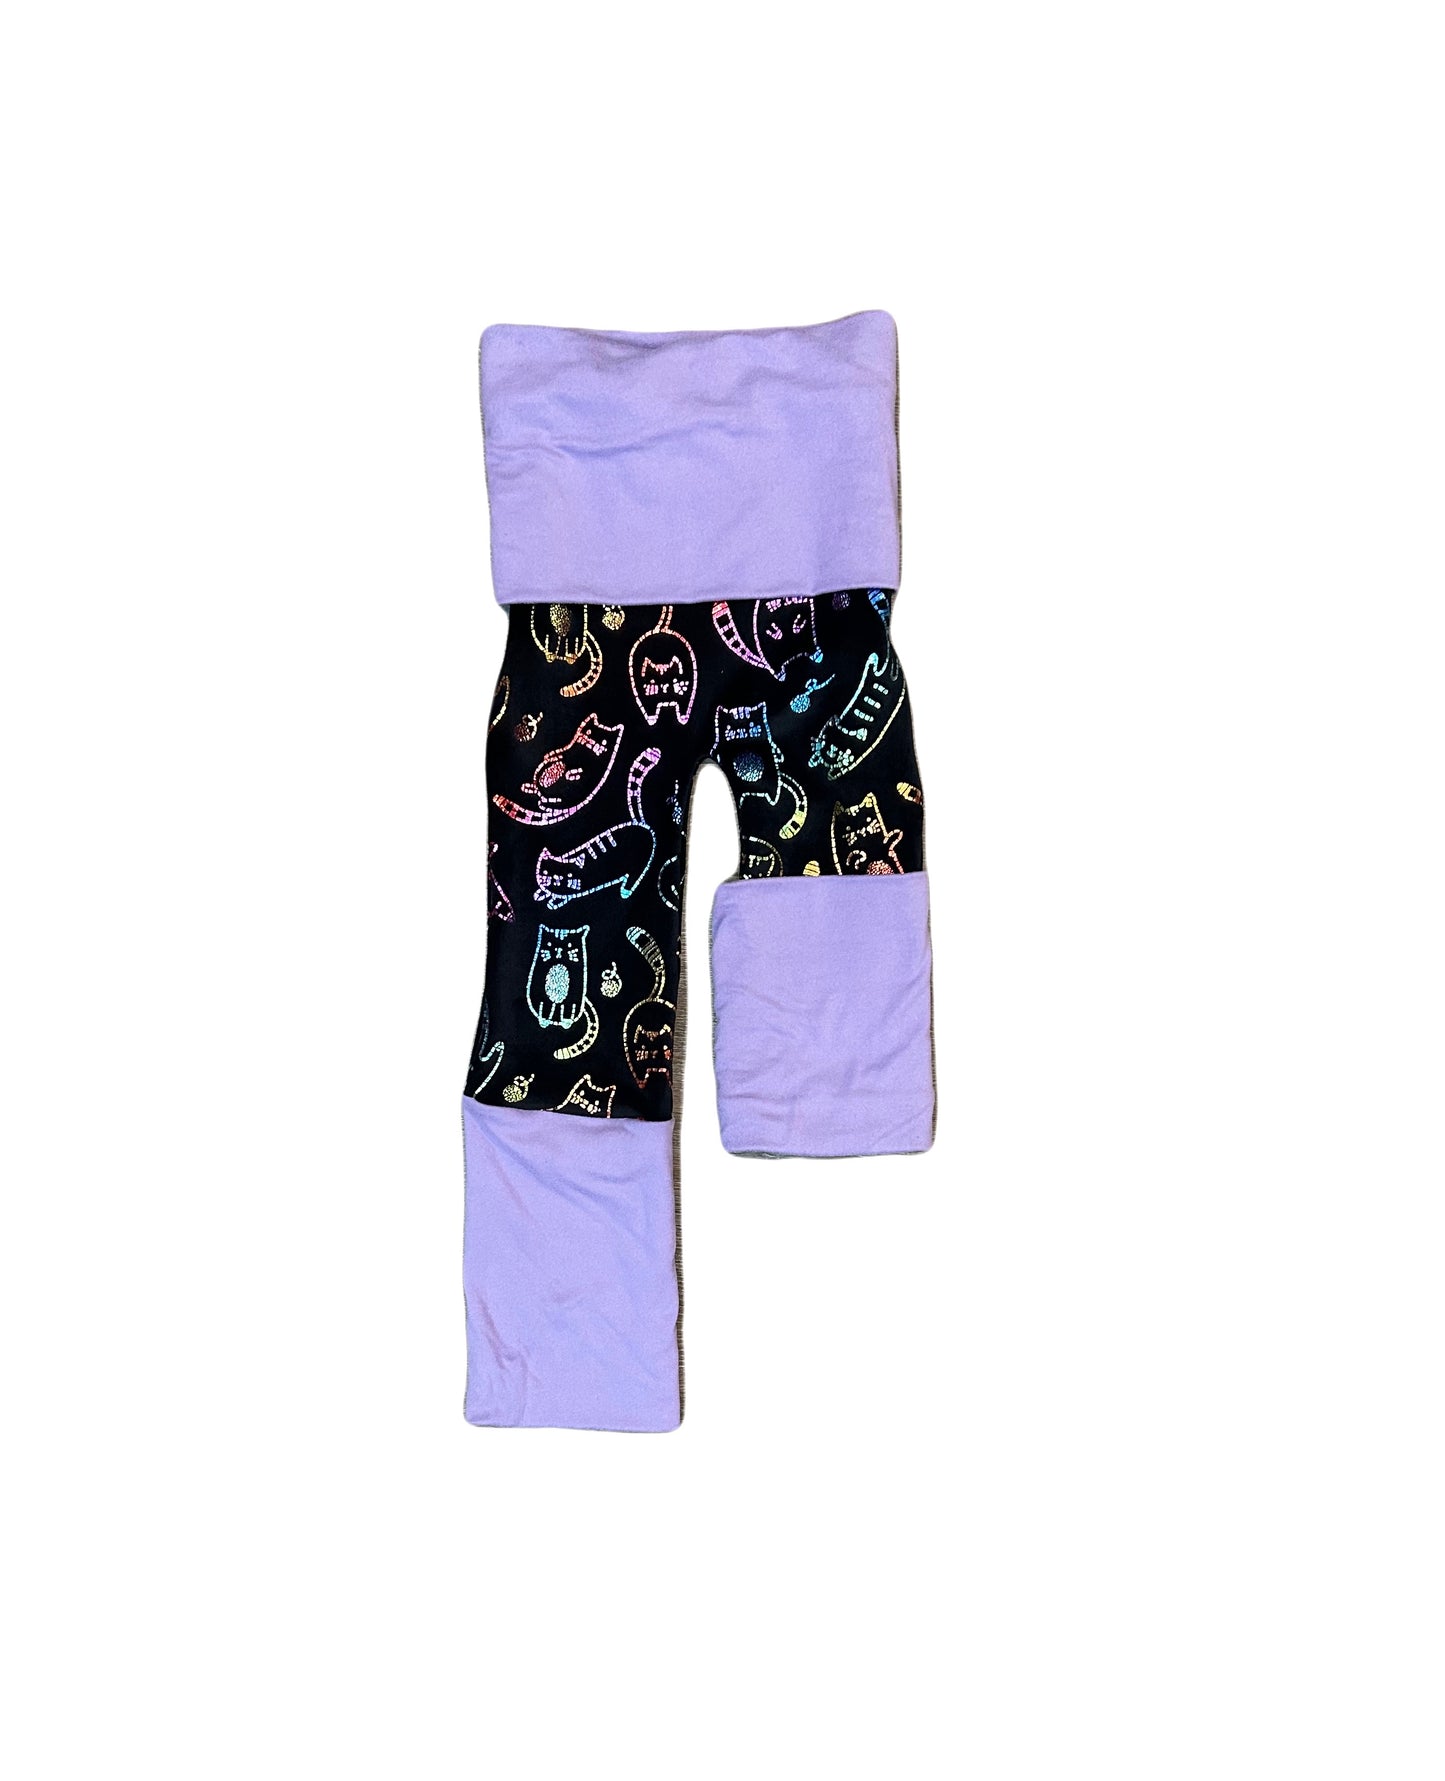 Adjustable pants - rainbow cats with lavender